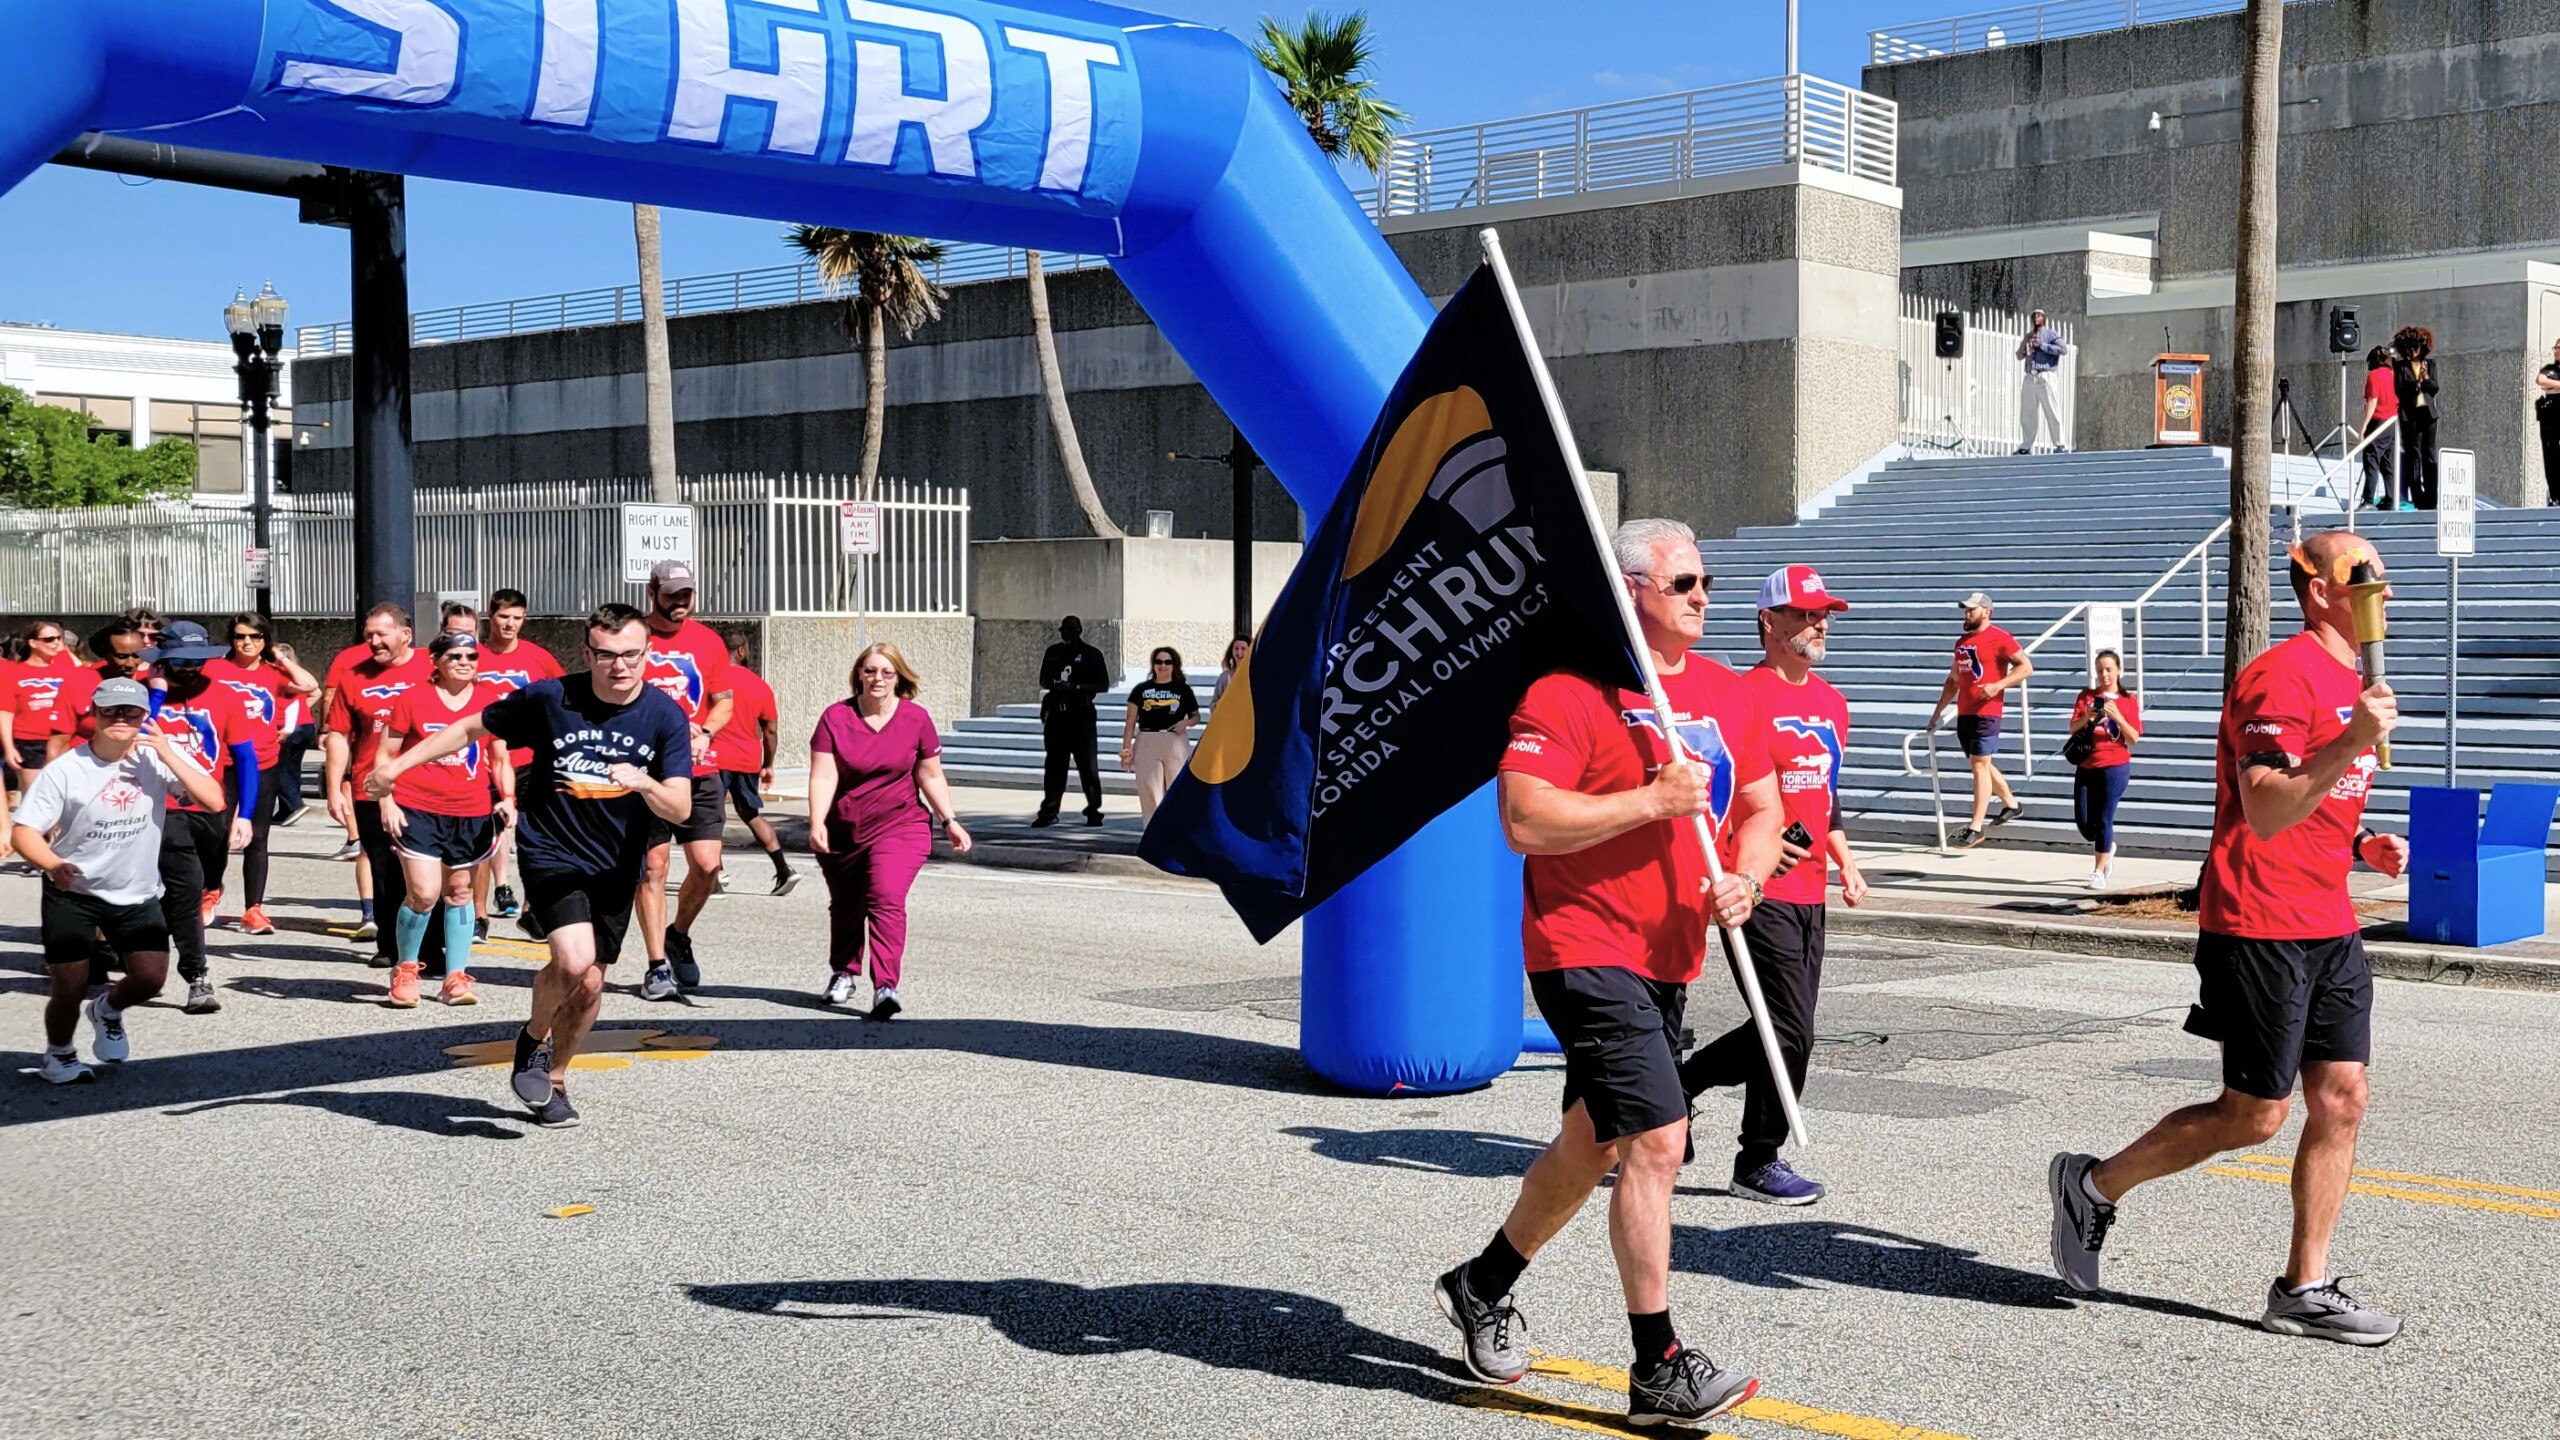 Featured image for “Torch Run raises $3,300 for Special Olympics”